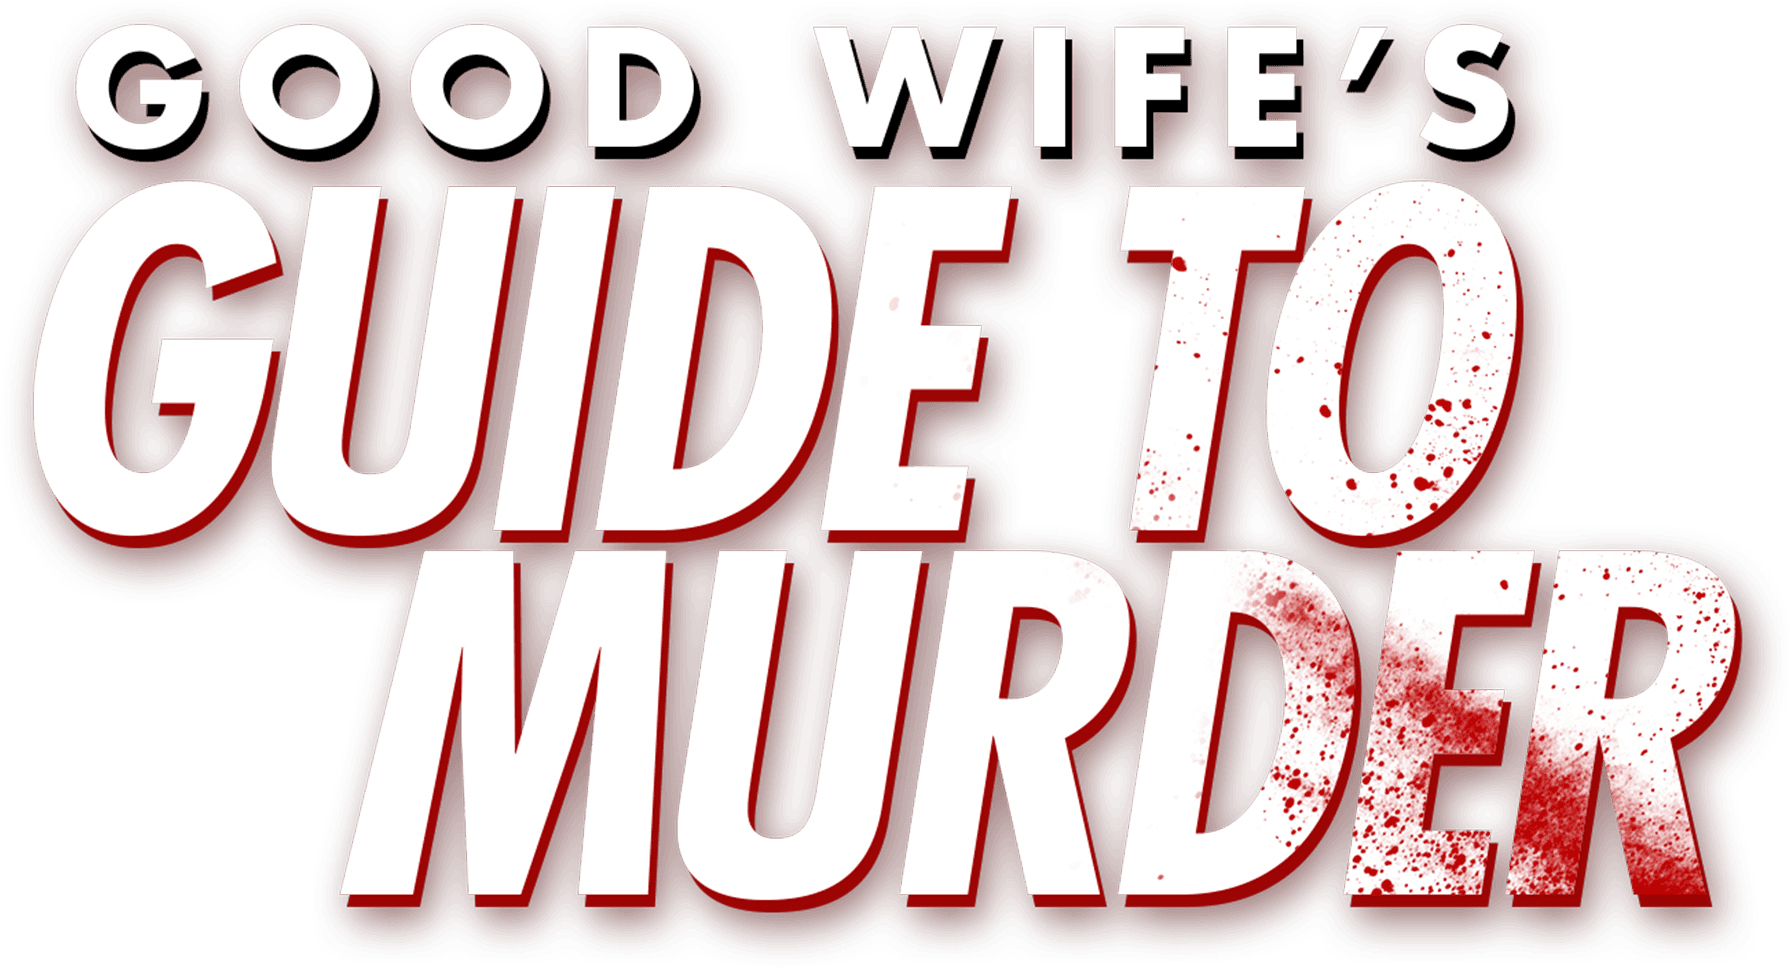 Good Wife's Guide to Murder logo